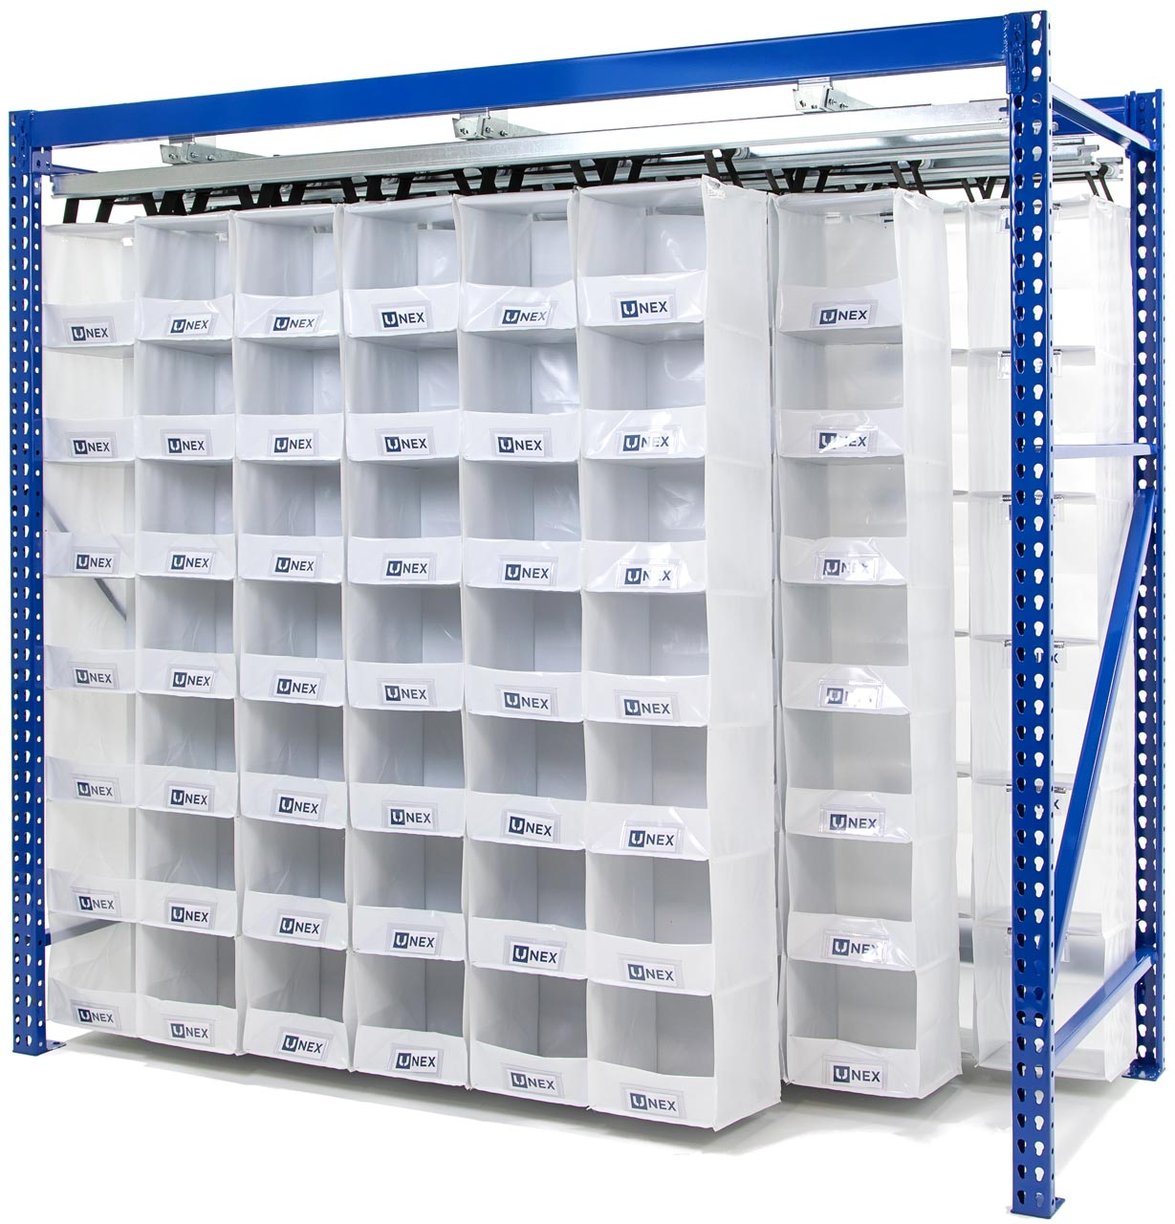 UNEX SpeedCell industrial shelving solution